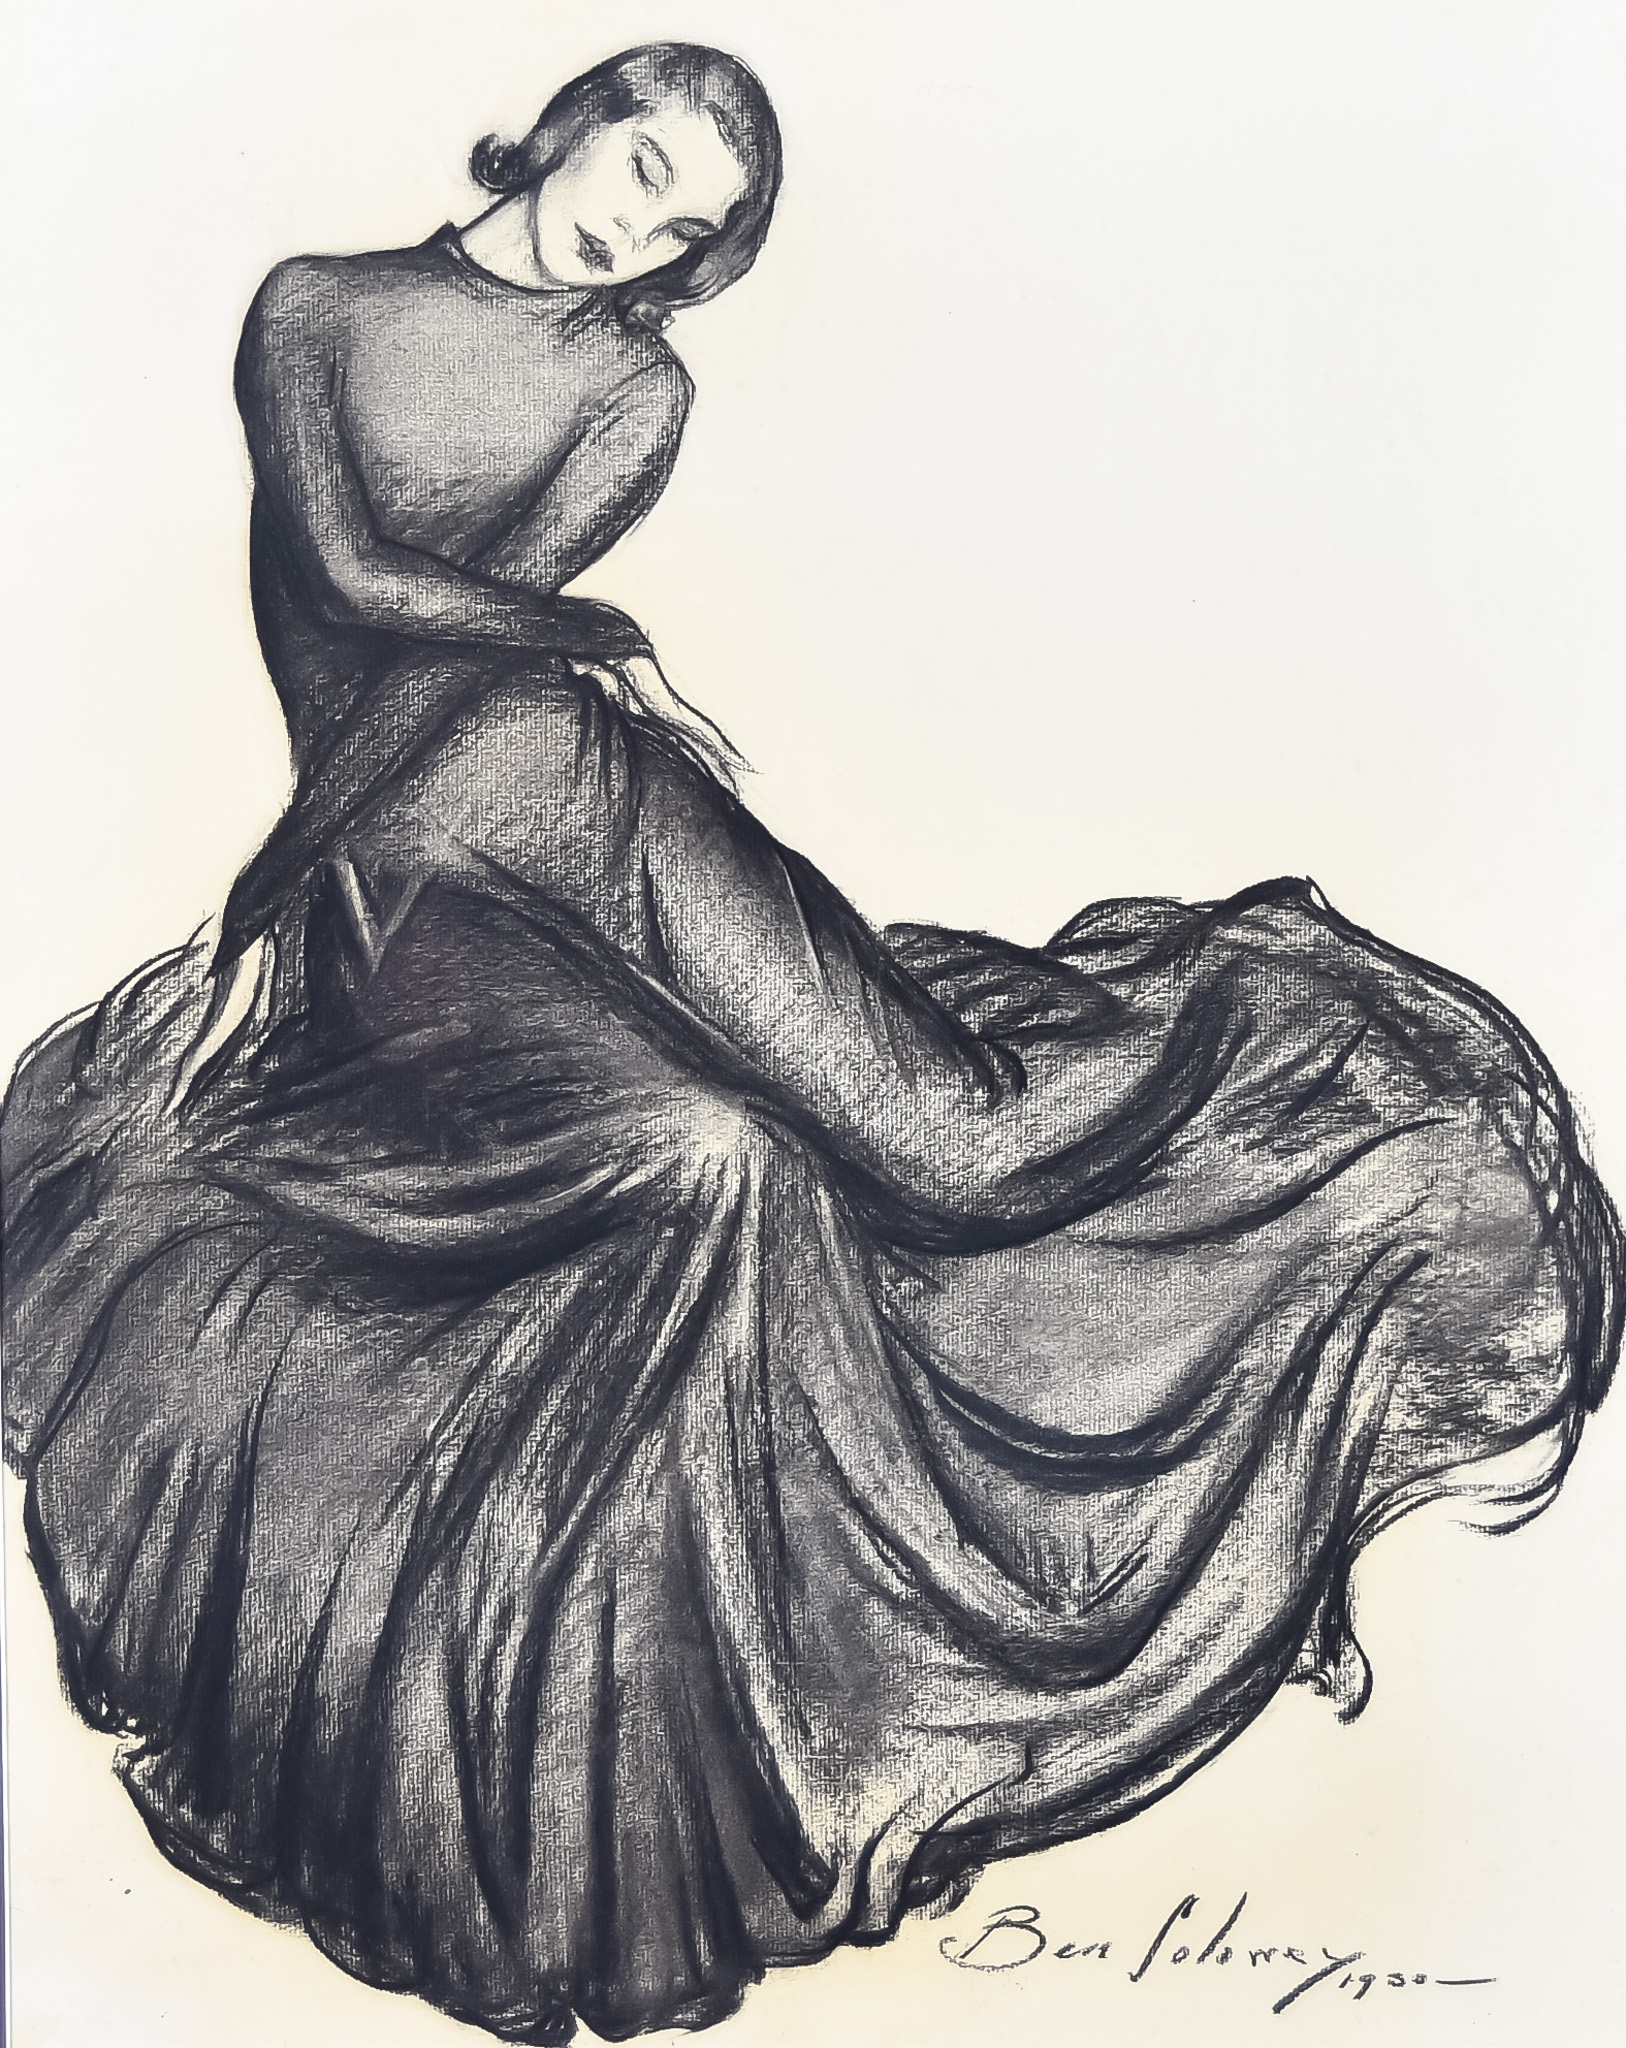 Ben Solowey (1900-1978) - Charcoal drawing - Woman in black, signed and dated 1930, 23ins x 19ins,